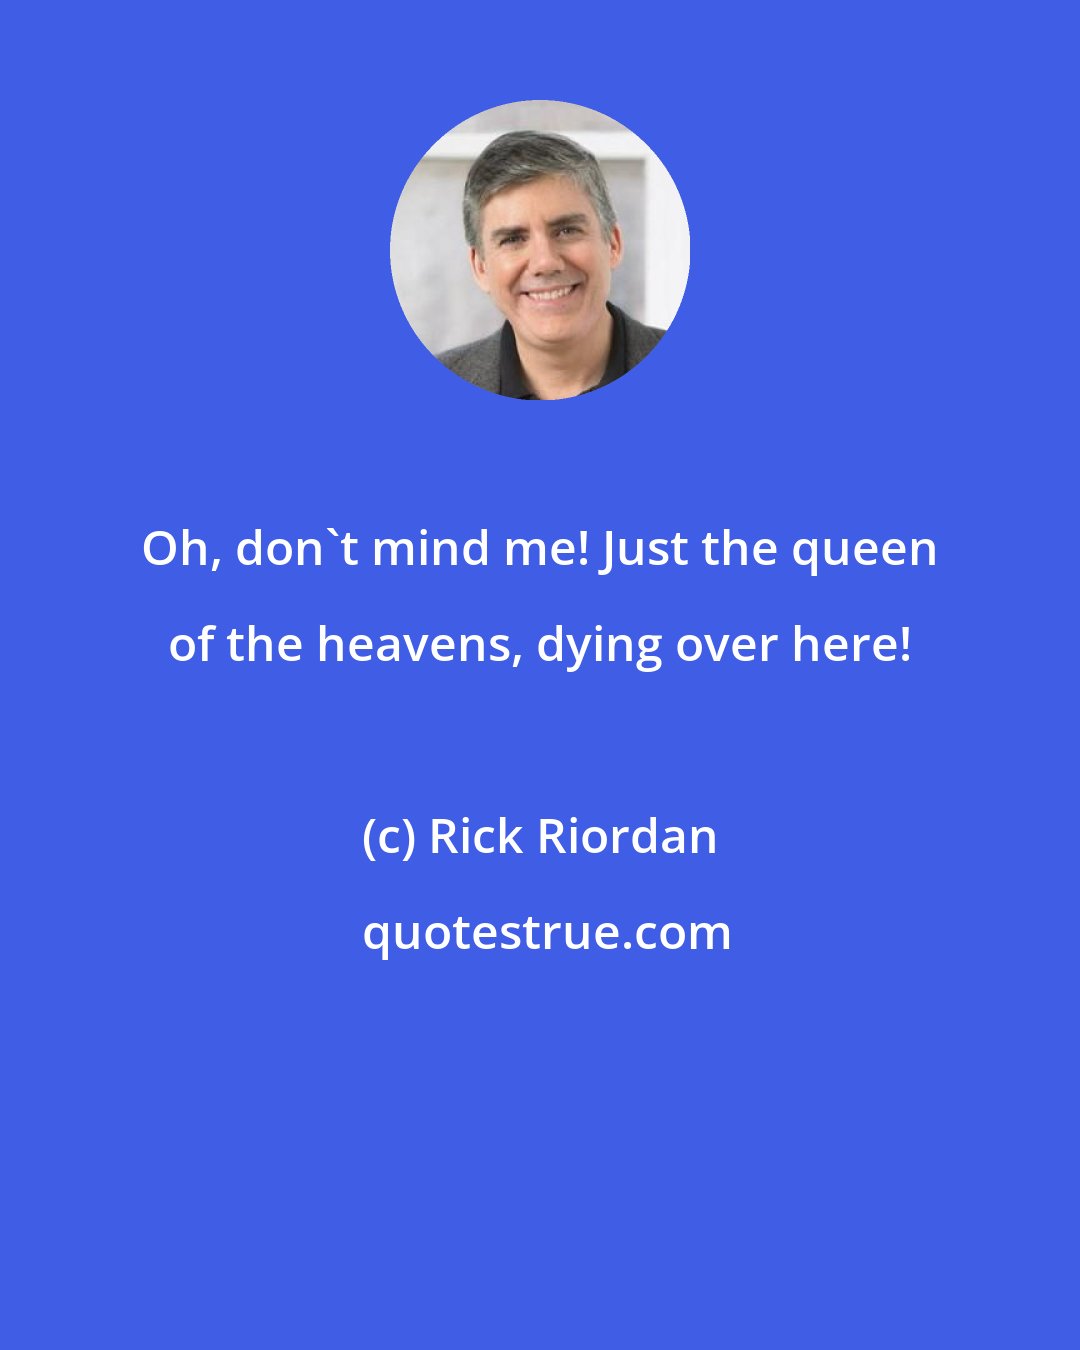 Rick Riordan: Oh, don't mind me! Just the queen of the heavens, dying over here!